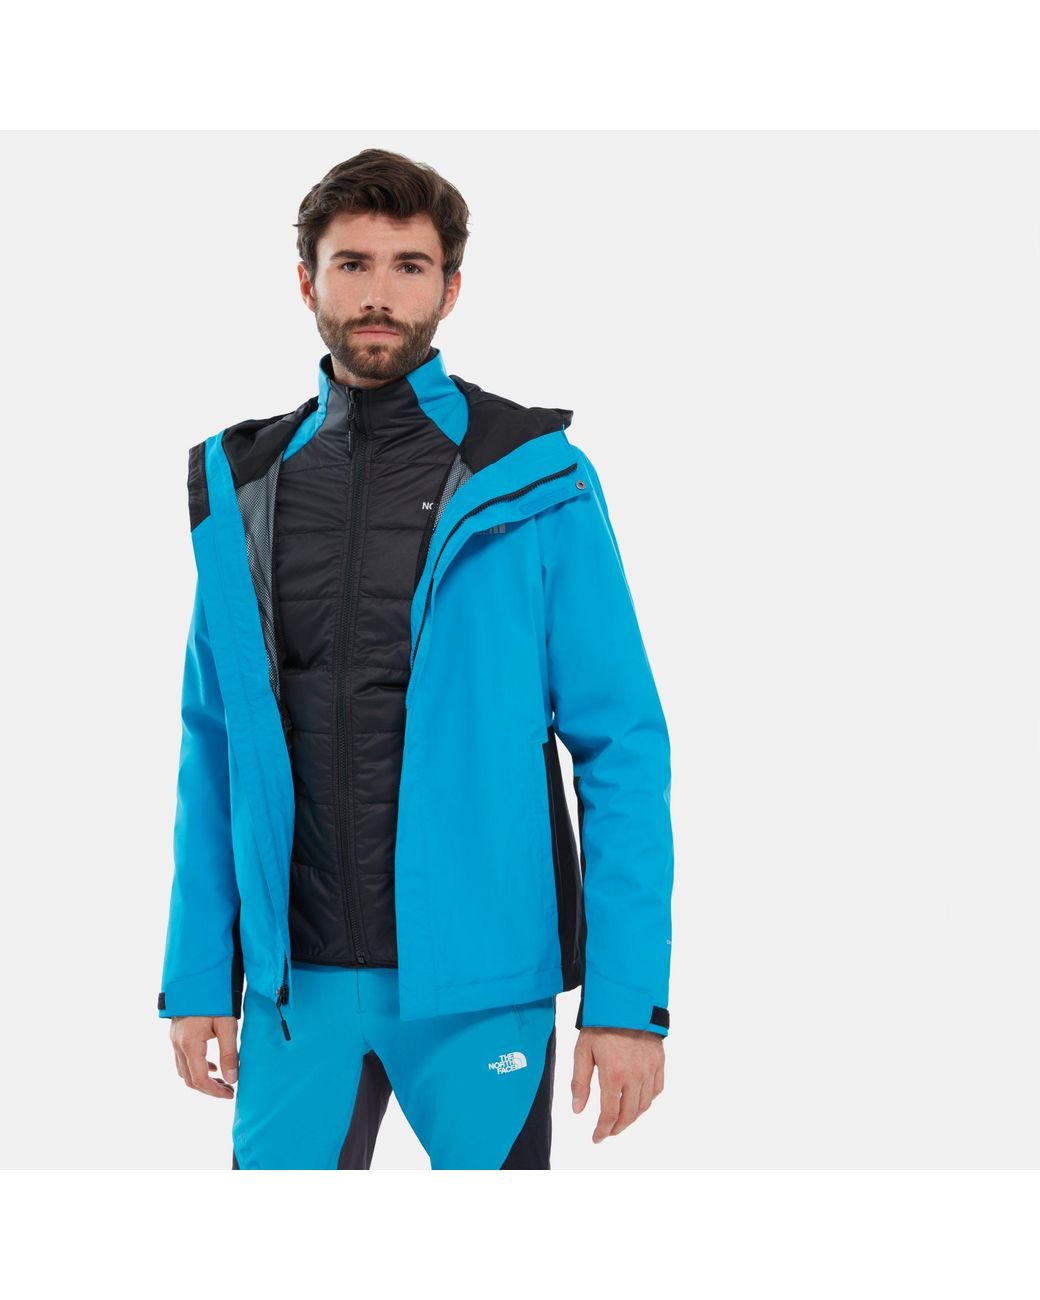 The North Face Merak Triclimate Jacket Outlet, SAVE 58%.